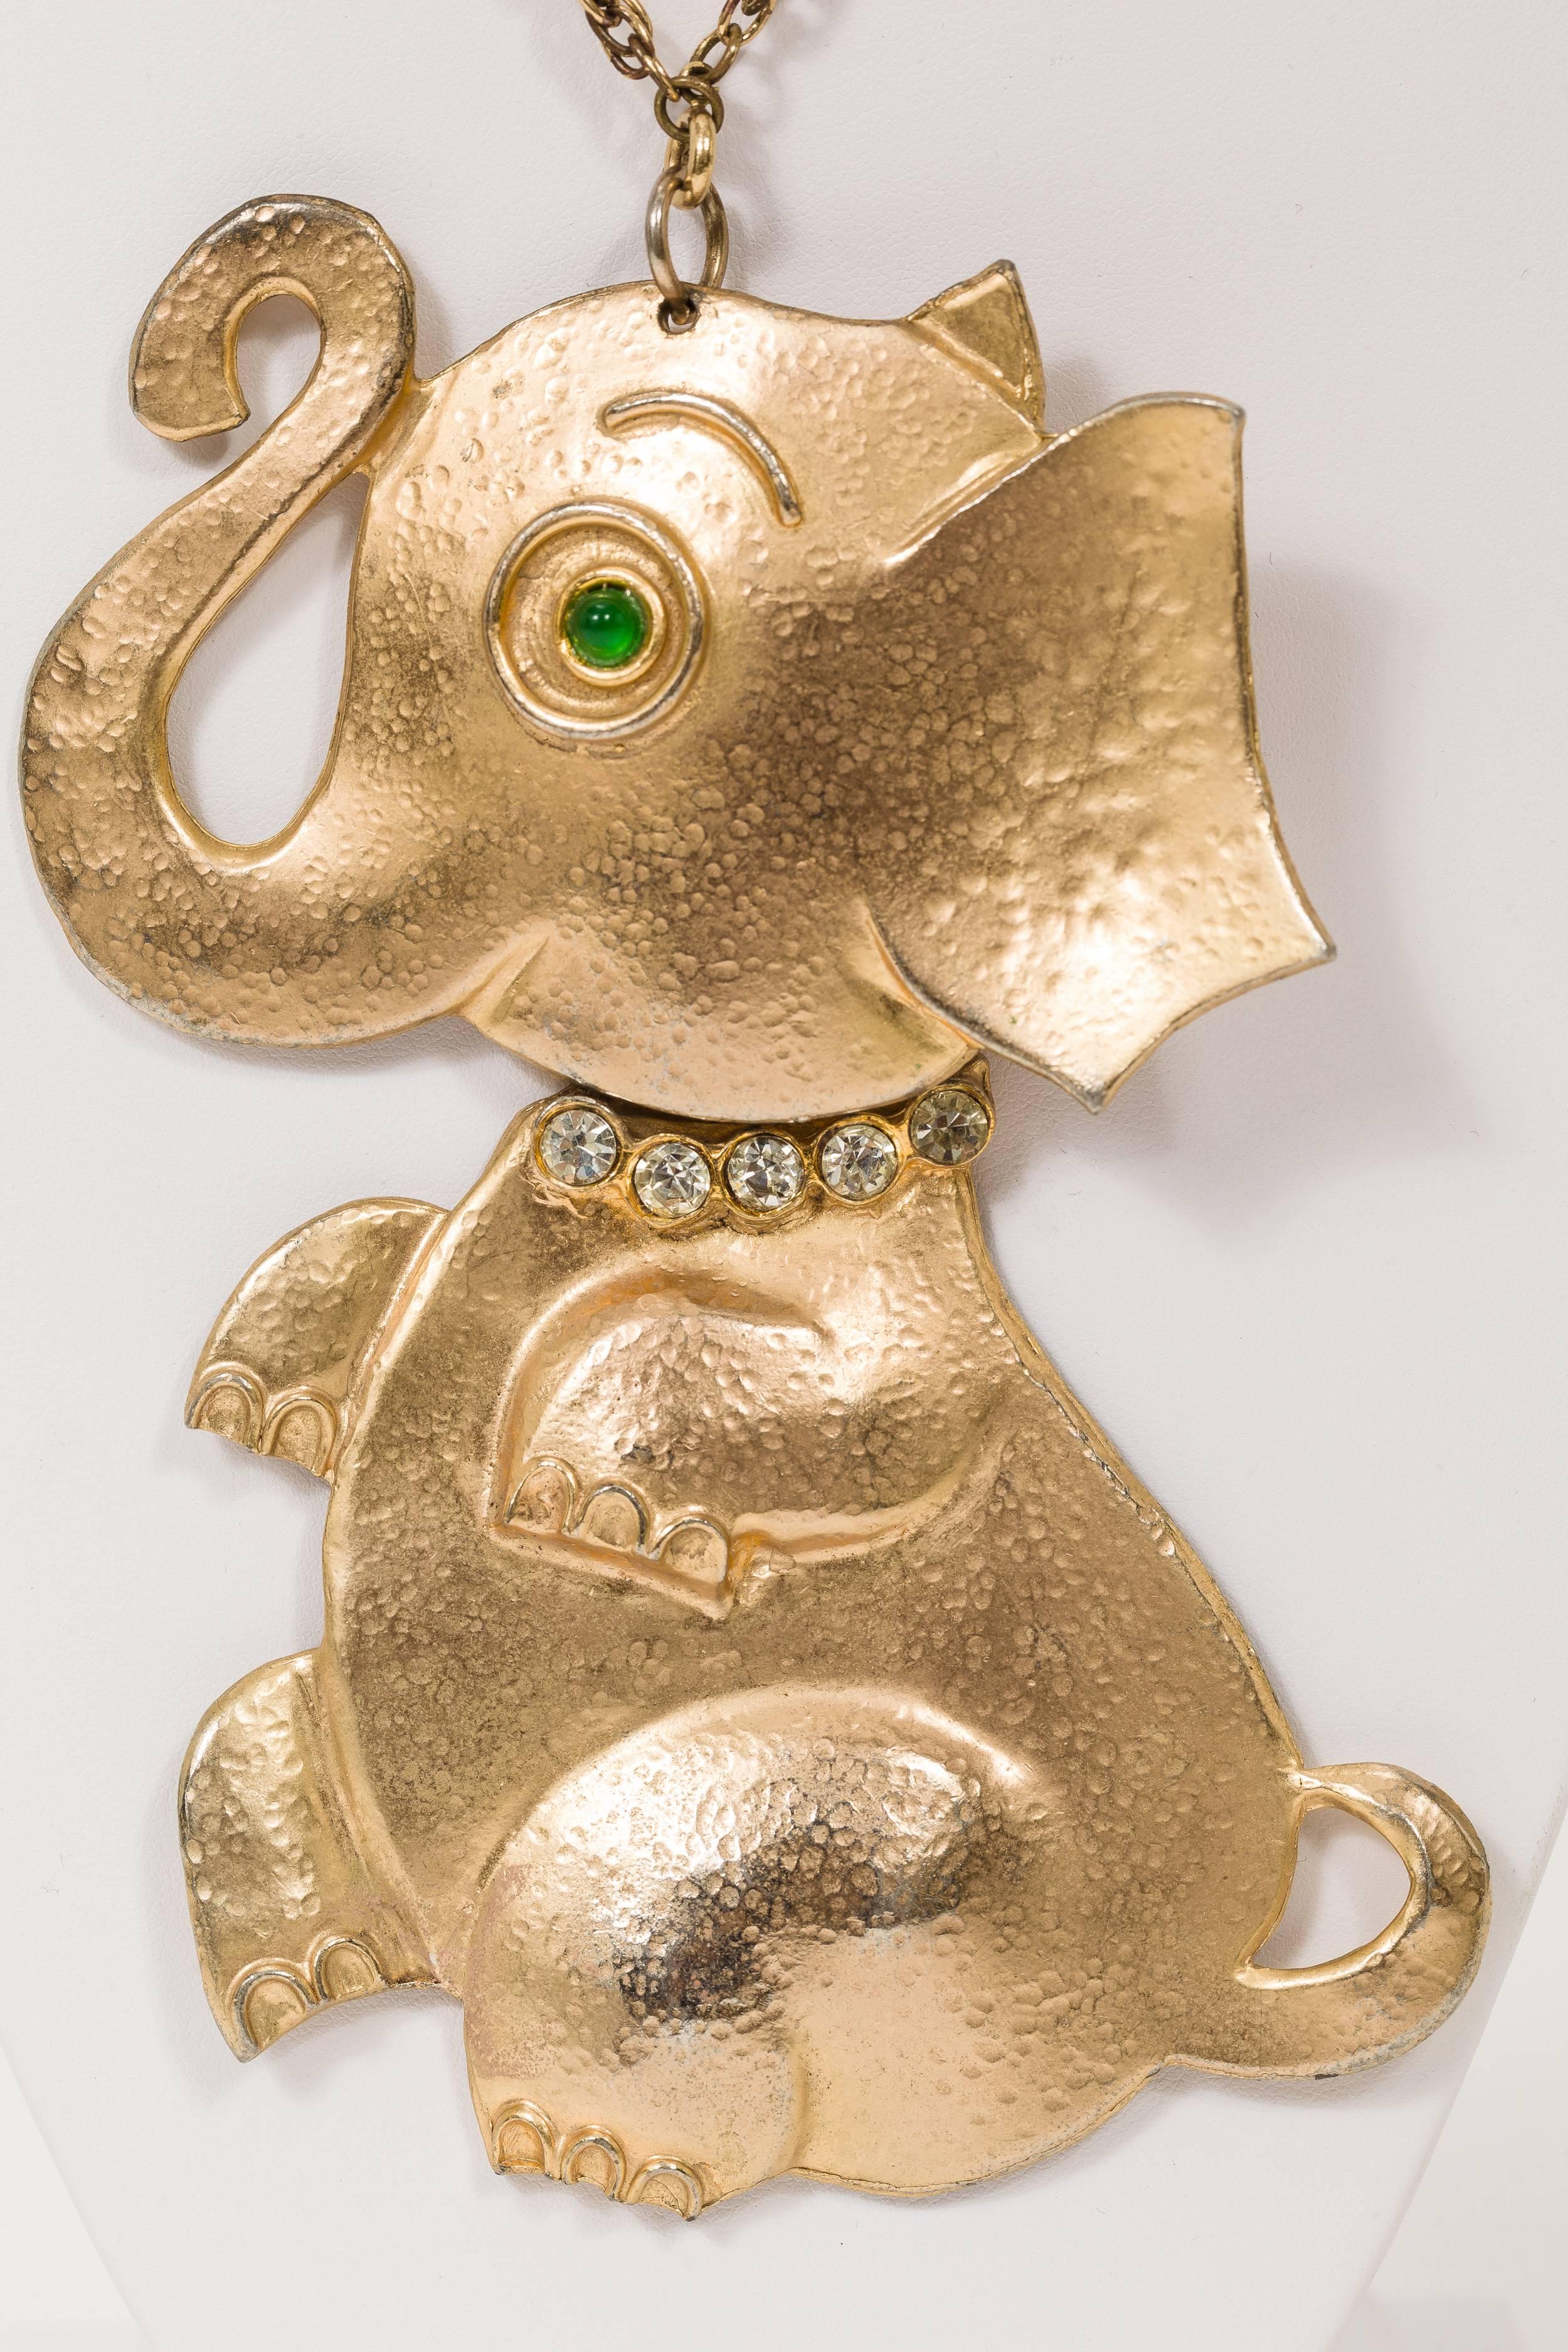 Rare vintage Hattie Carnegie goldtone elephant pendant necklace with articulated, moveable head. Elephant is decorated at the neck with a collar of rhinestones and a green cabochon stone for the eye. Stamped 